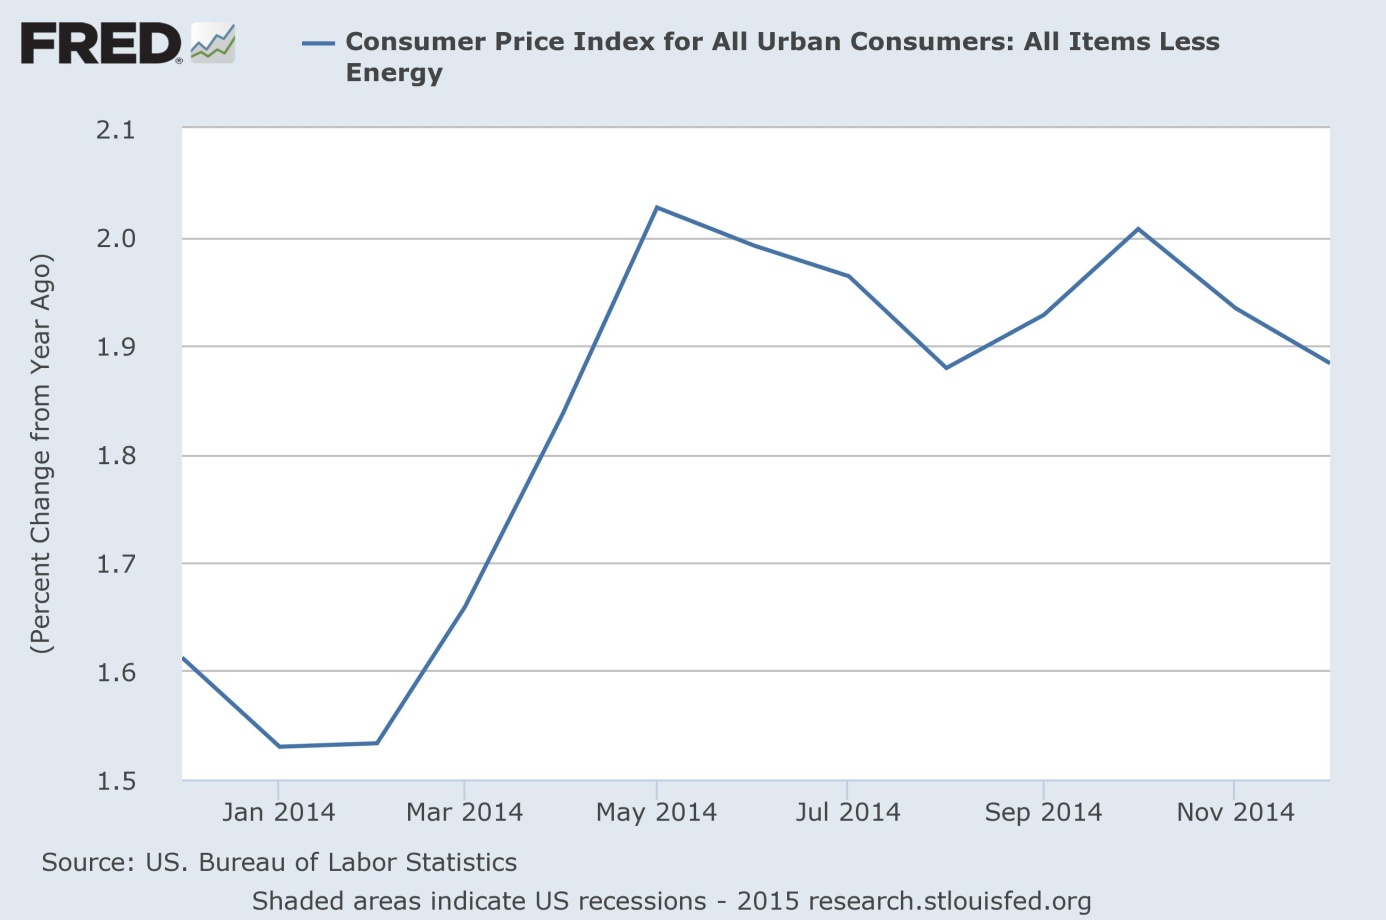 Consumer Price Index for All Urban Consumers without energy prices from December 2013 to December 2014 (percent change from year ago).